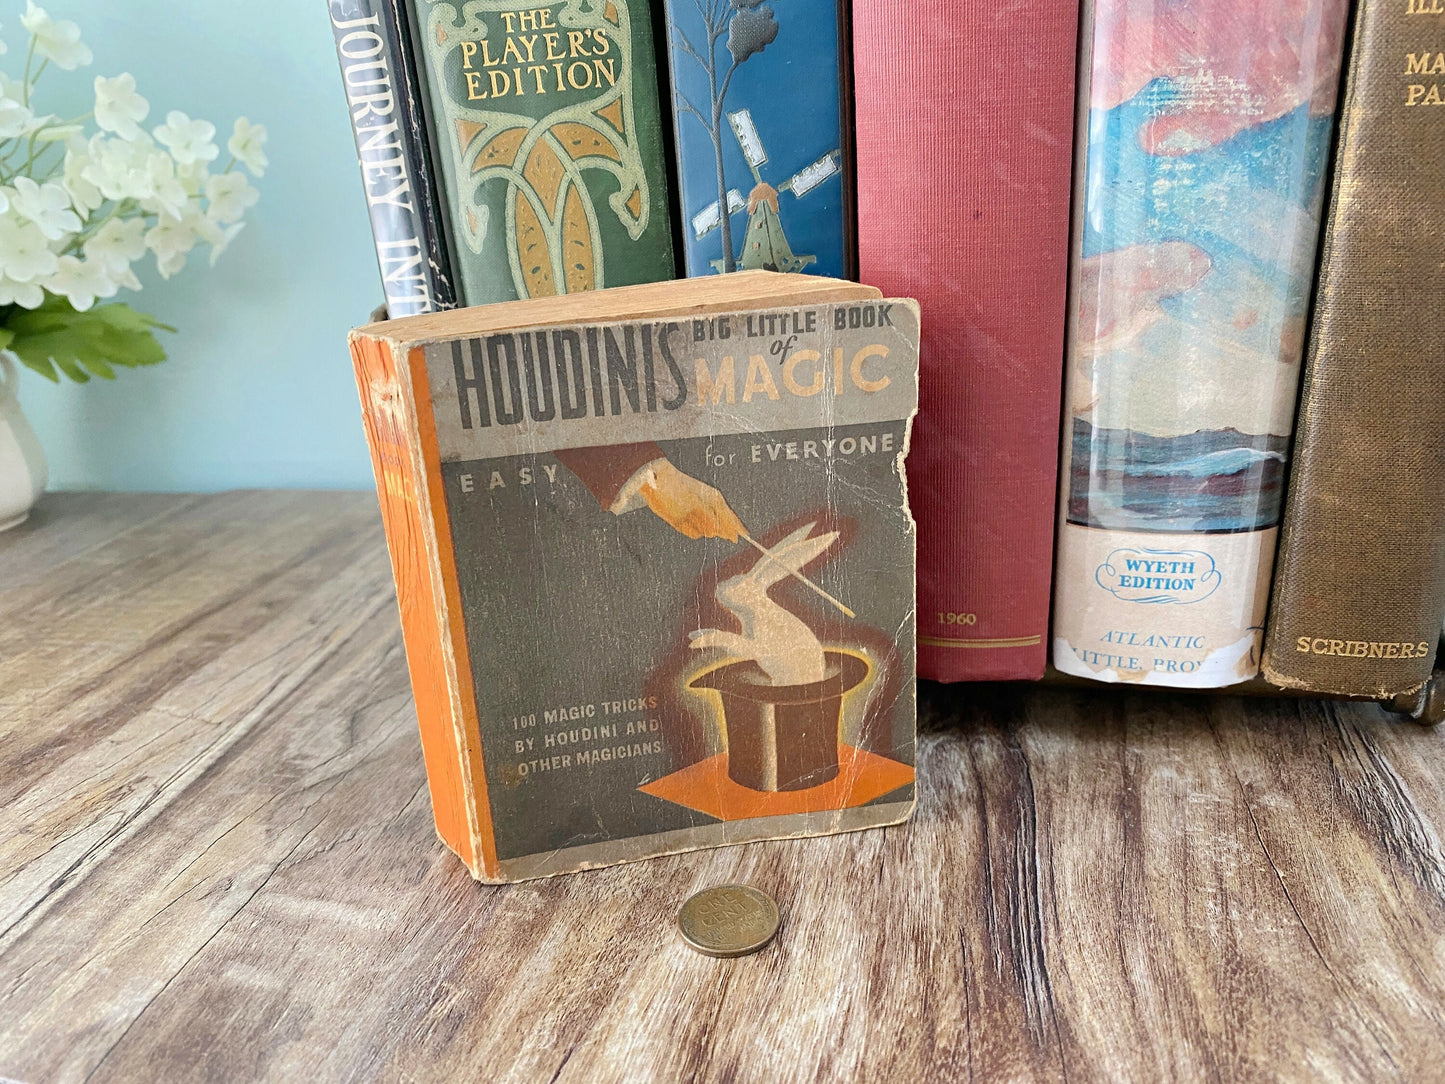 Vintage Houdini's Big Little Book of Magic 1927 First Edition